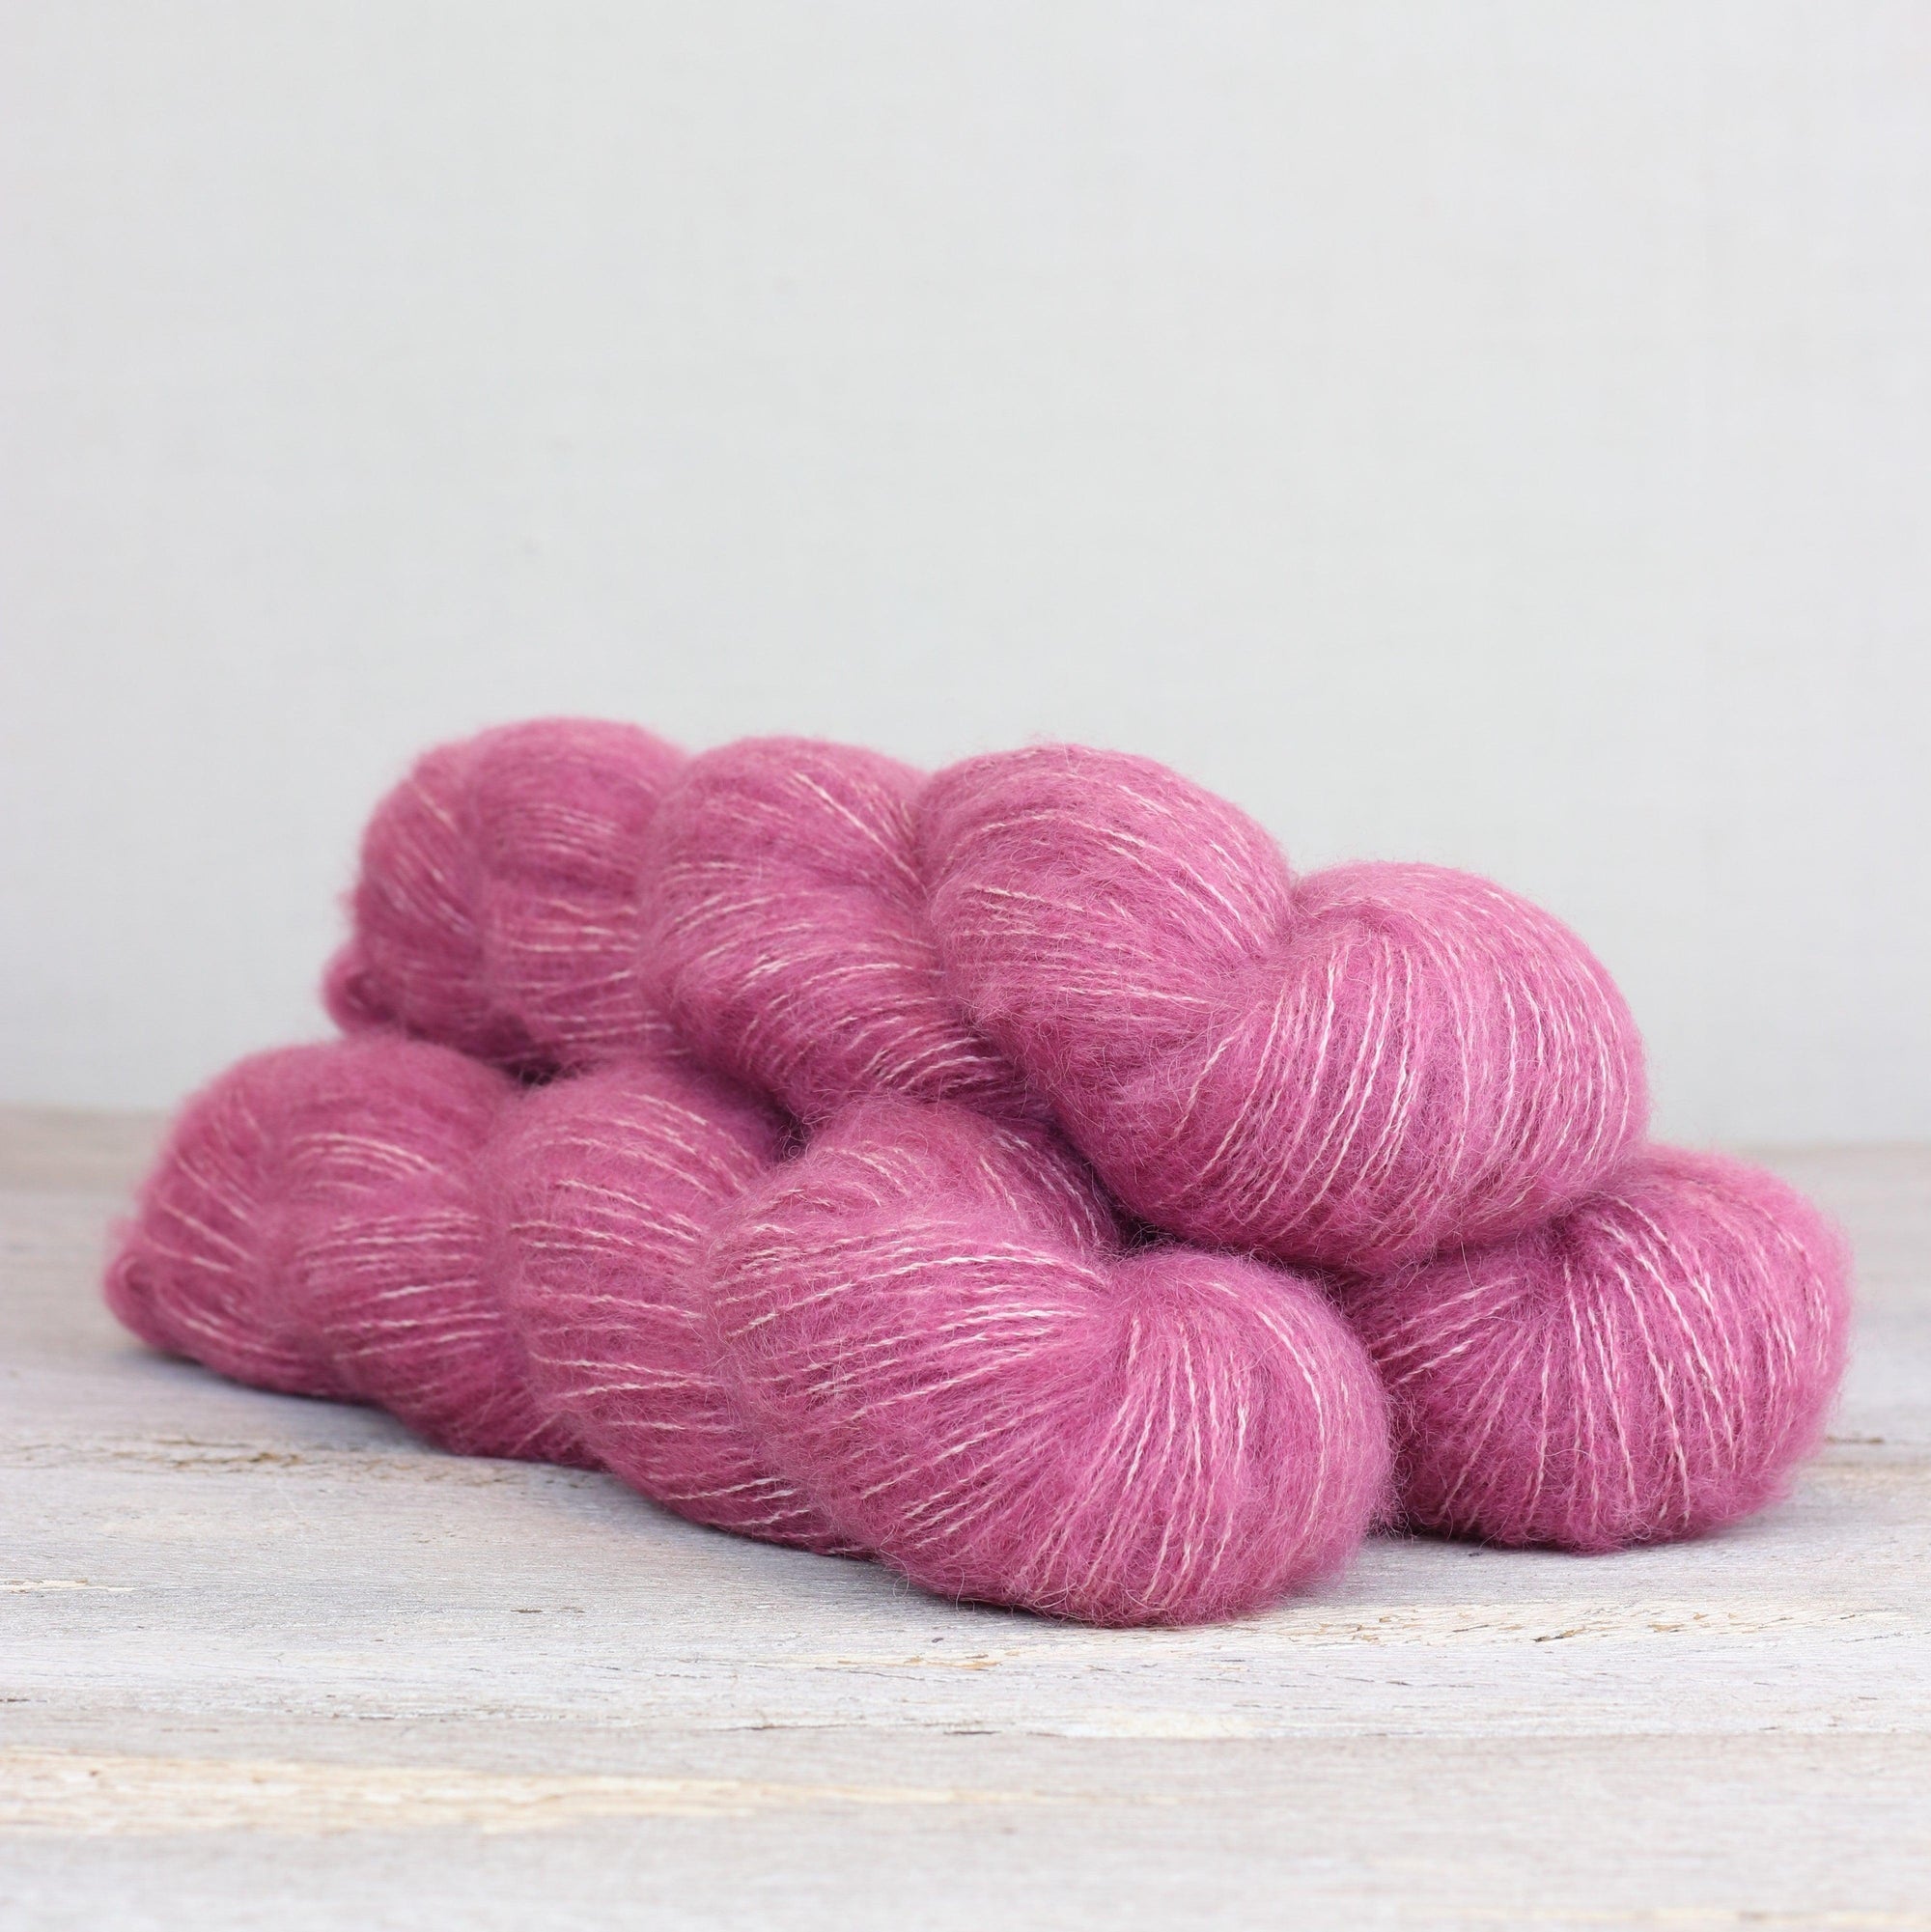 The Fibre Co. The Fibre Co. Cirro - Pink Planet - Sport Weight Yarn